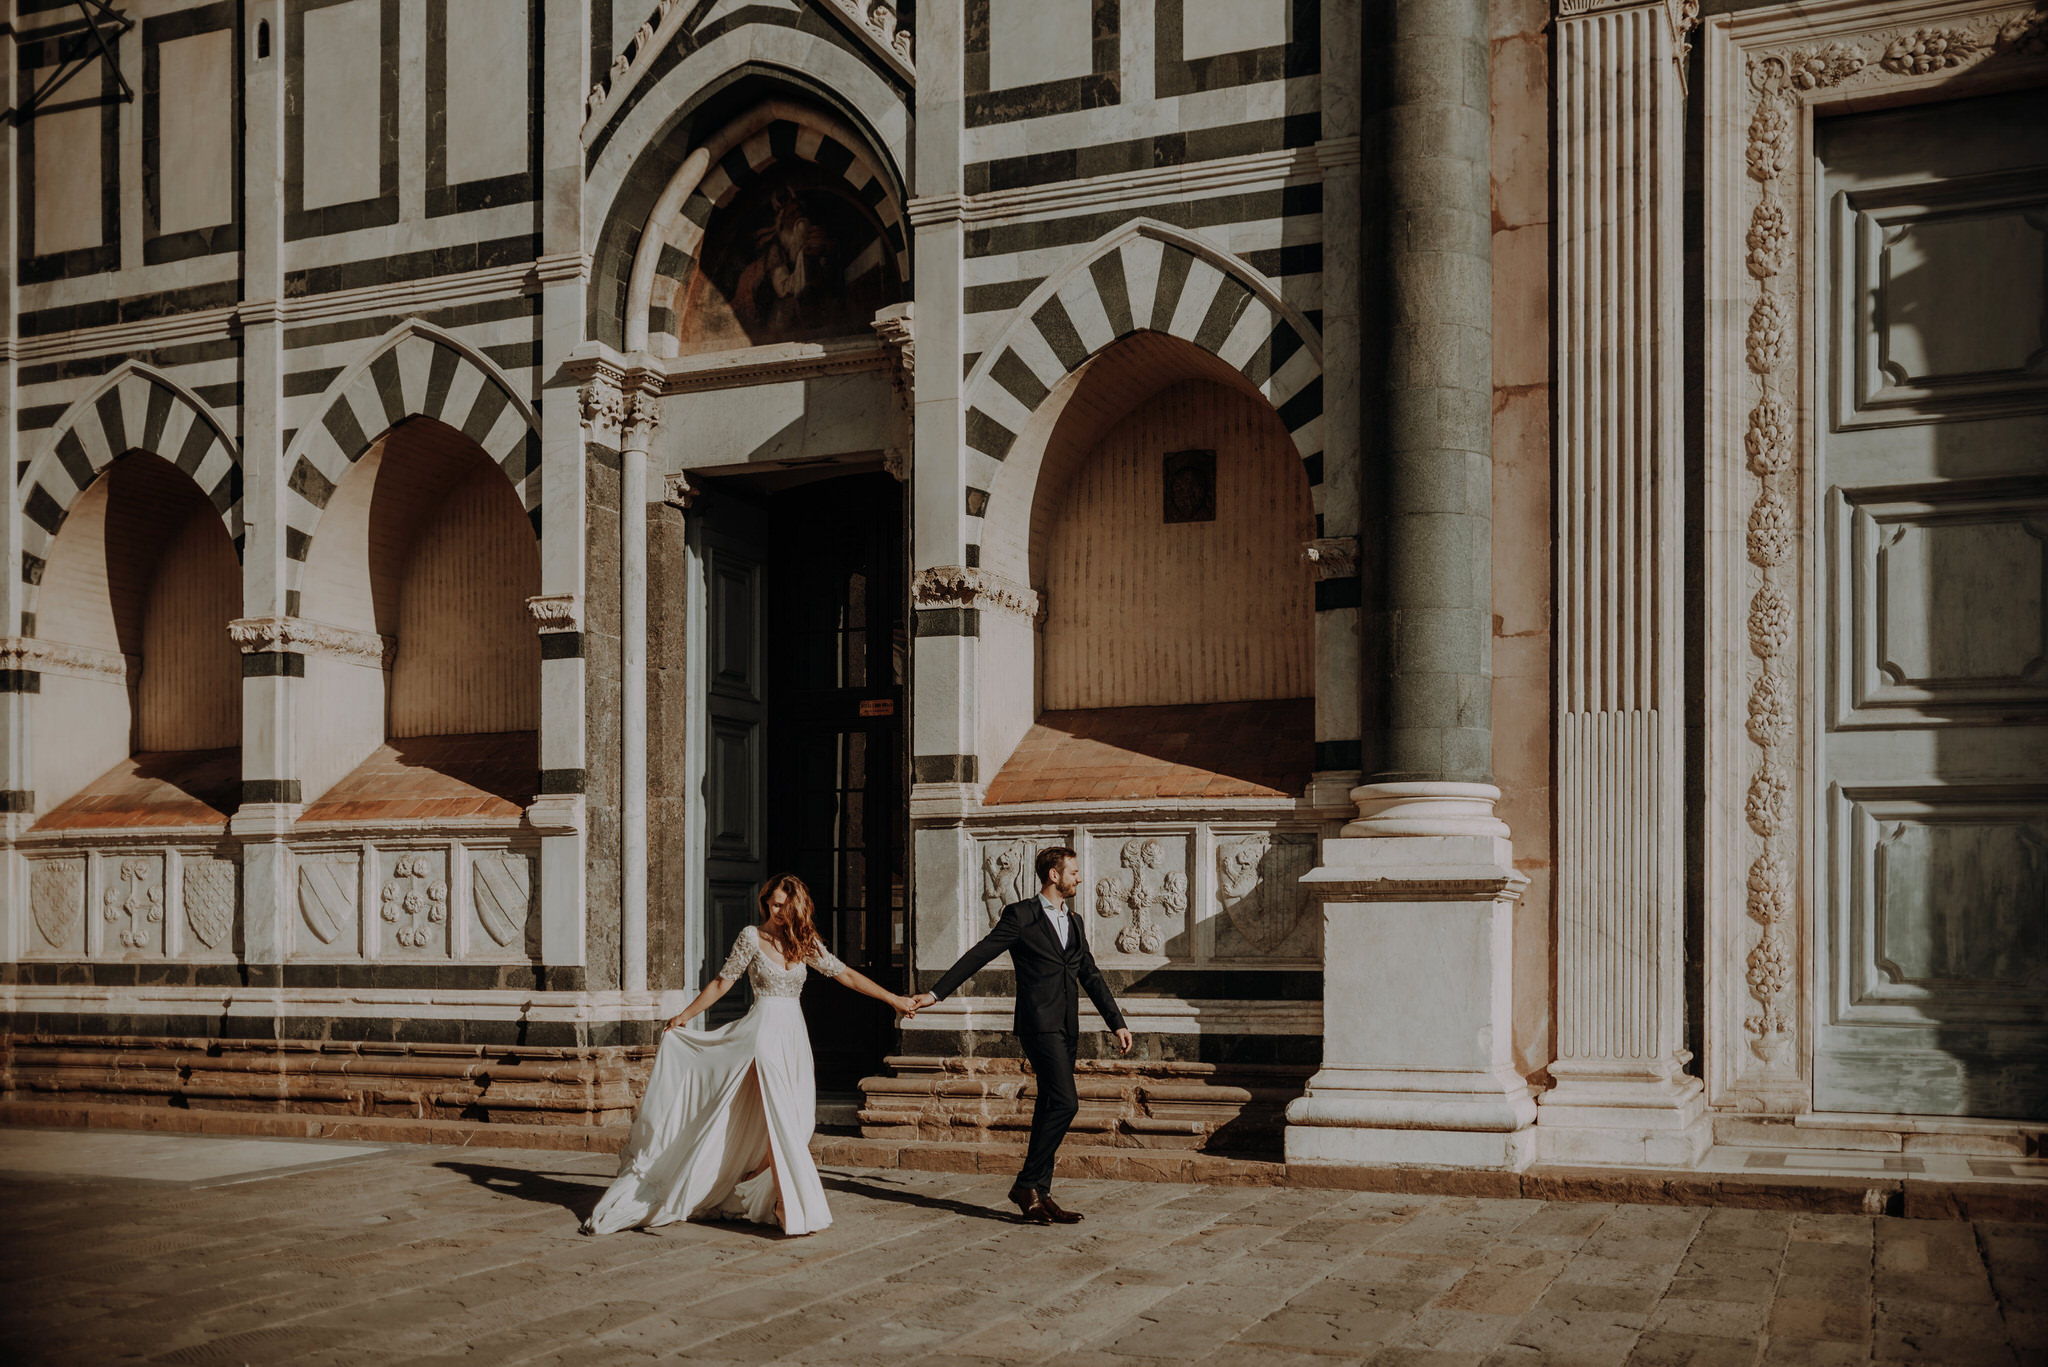 Sunrise honeymoon couple session for Marta and Clemens to celebrate their wedding in Florence. Enjoying their wedding attire again in Italy.